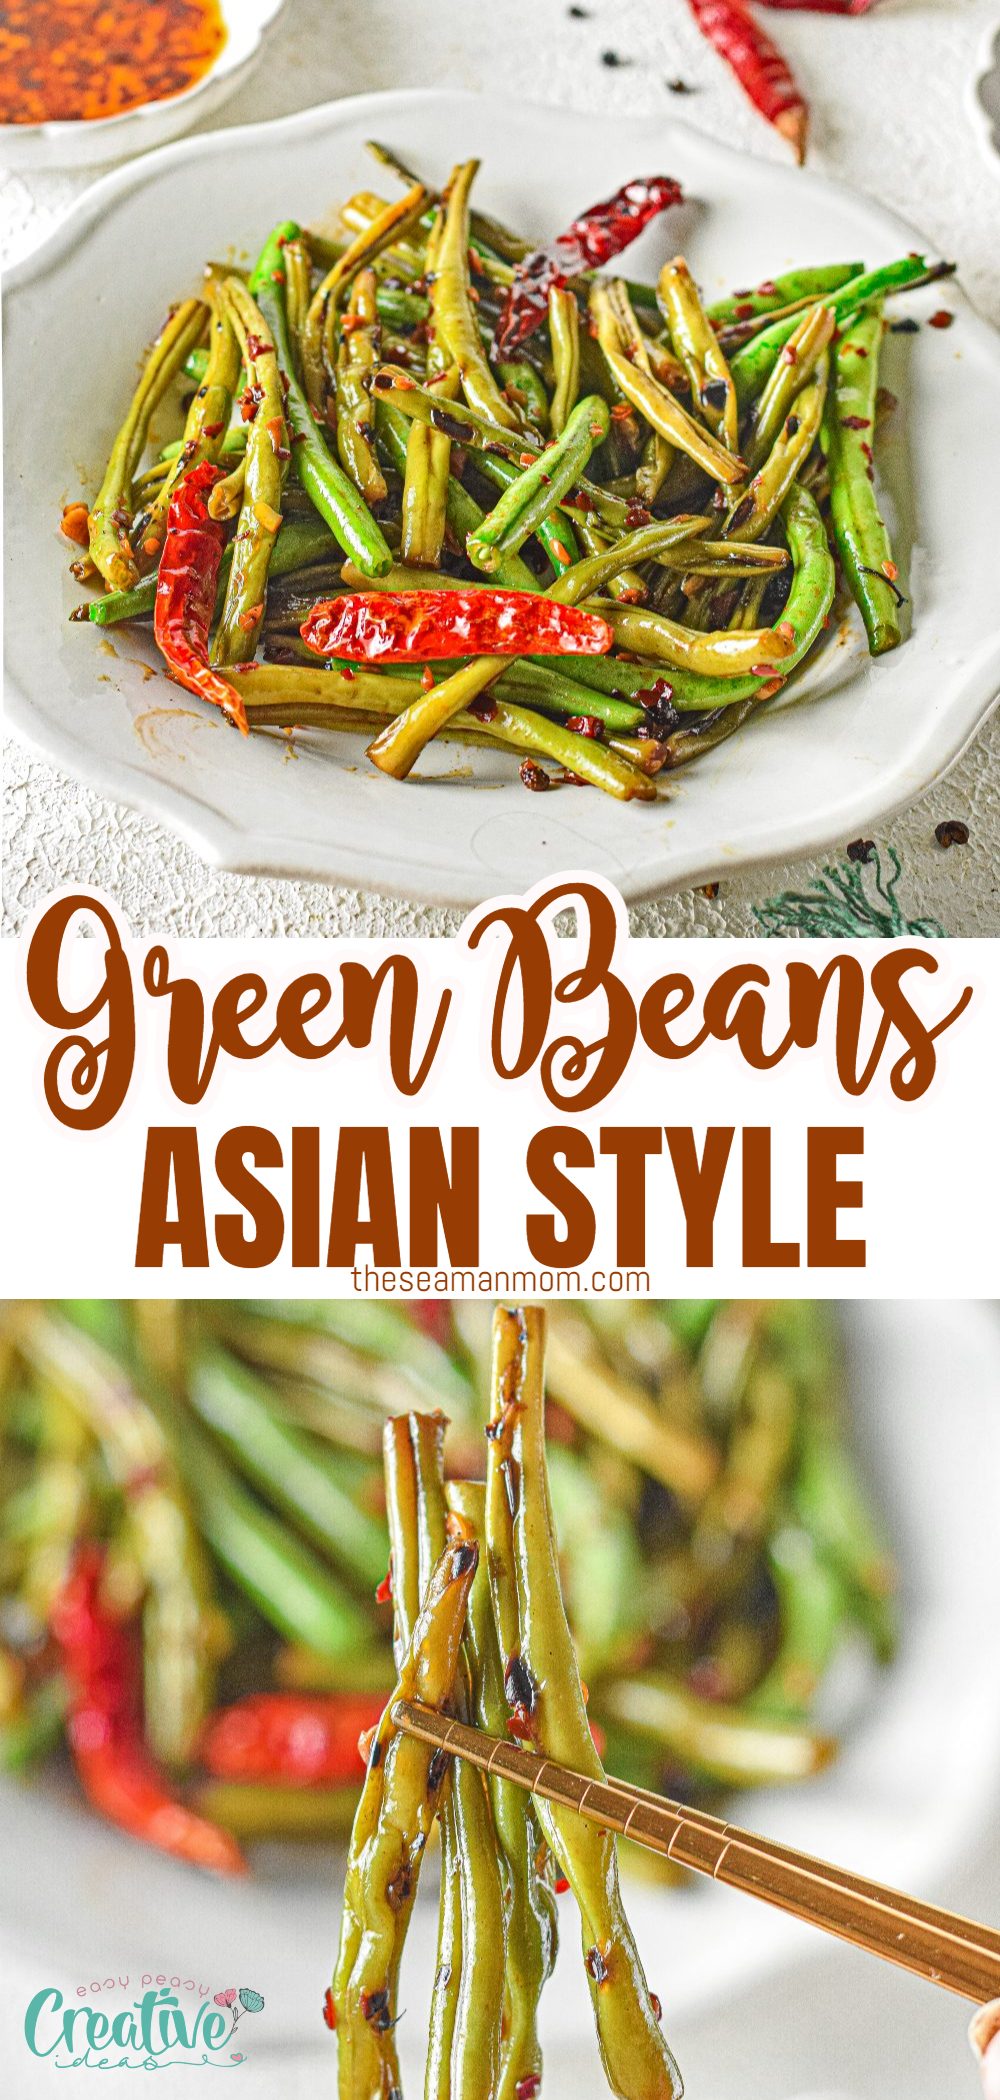 Asian Green Beans have been part of the Asian cuisine for centuries. They are a flavorful, crunchy side dish that can add nutrition to any meal. From stir-fries to salads or simply steamed and served with a sprinkle of sea salt, there is something for everyone! This Asian style green bean dish is sure to please any crowd. Use my delicious and easy recipe to create an Asian-style green bean dish everyone will love!  via @petroneagu